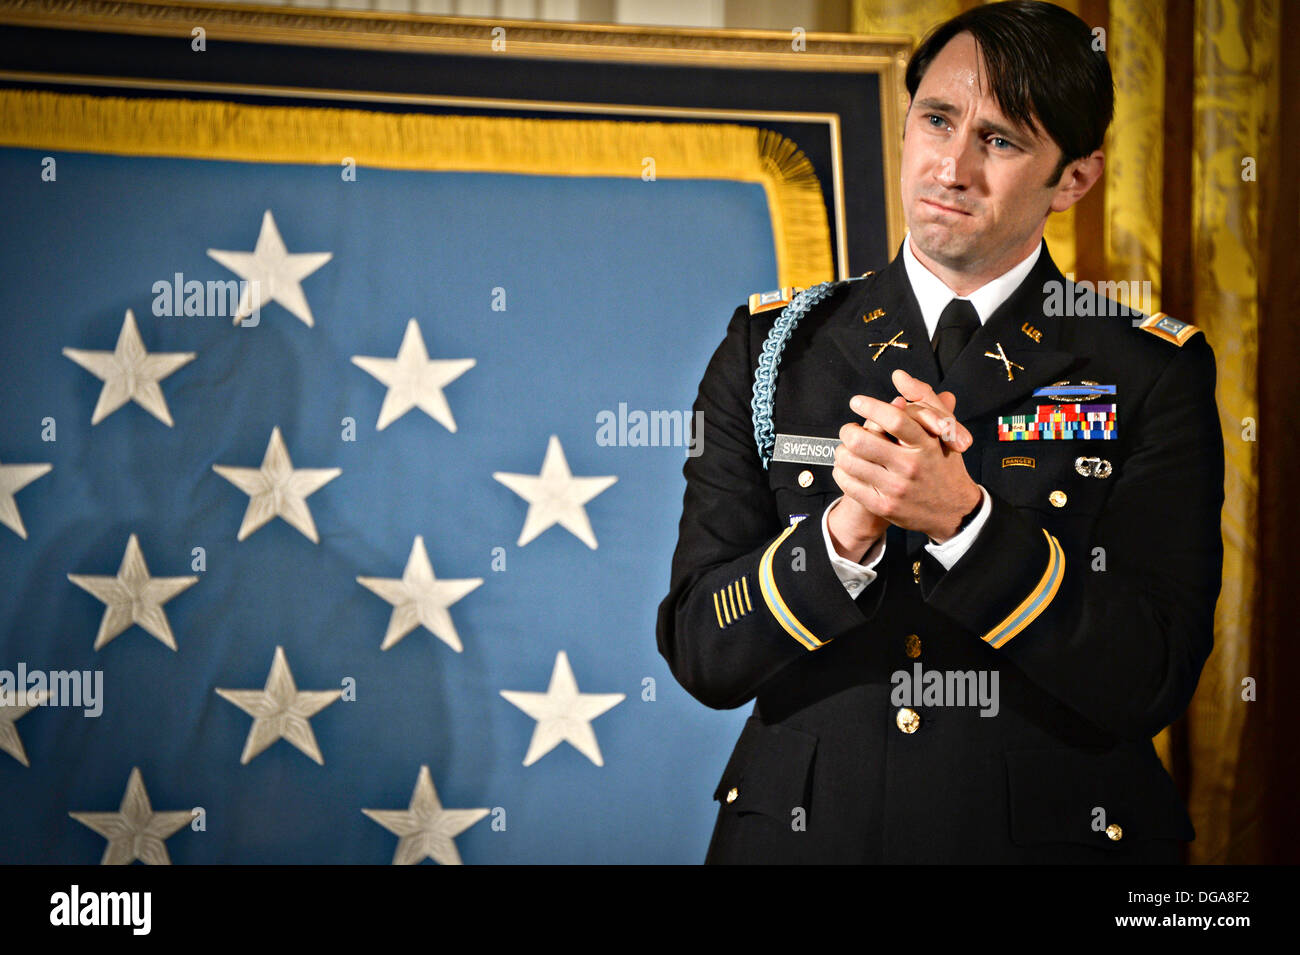 US Army Capt. William D. Swenson during the Medal of Honor ceremony in the East Room of the White House October 15, 2013 in Washington, DC. The Medal of Honor is the nation's highest military honor. Stock Photo